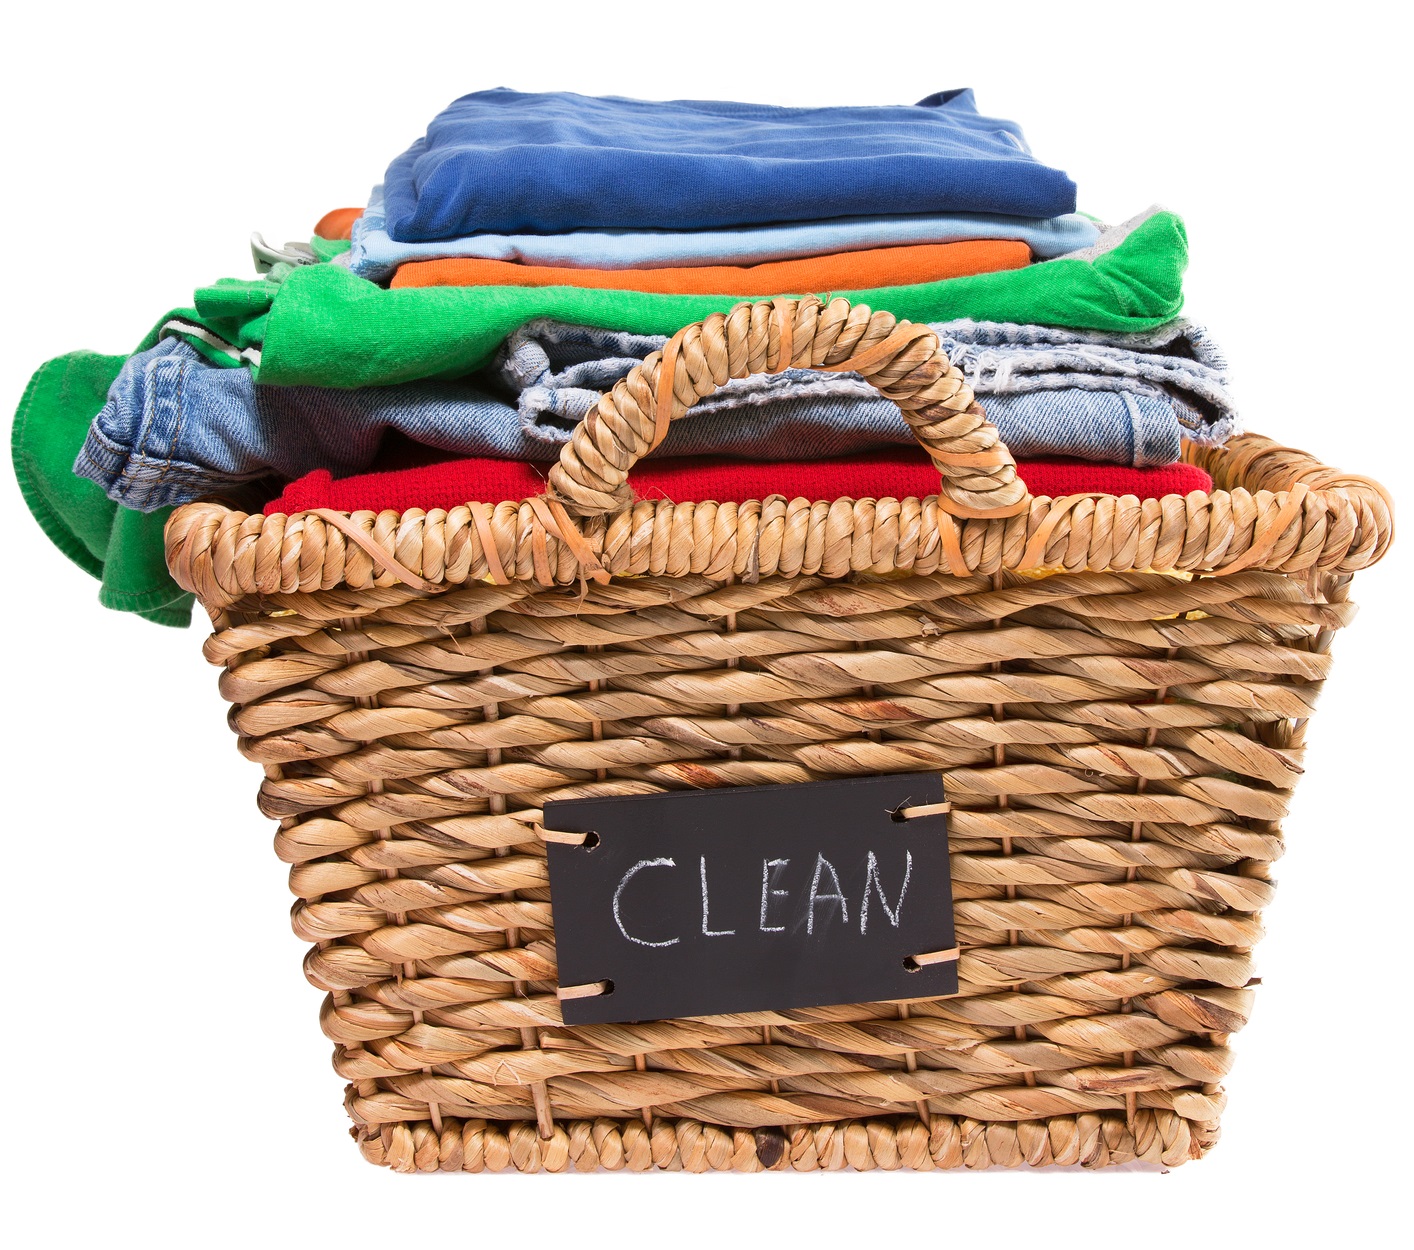 Wicker laundry basket filled with stack of folded colorful clean clothes ready for ironing with a handwritten label on the side of the basket saying - Clean